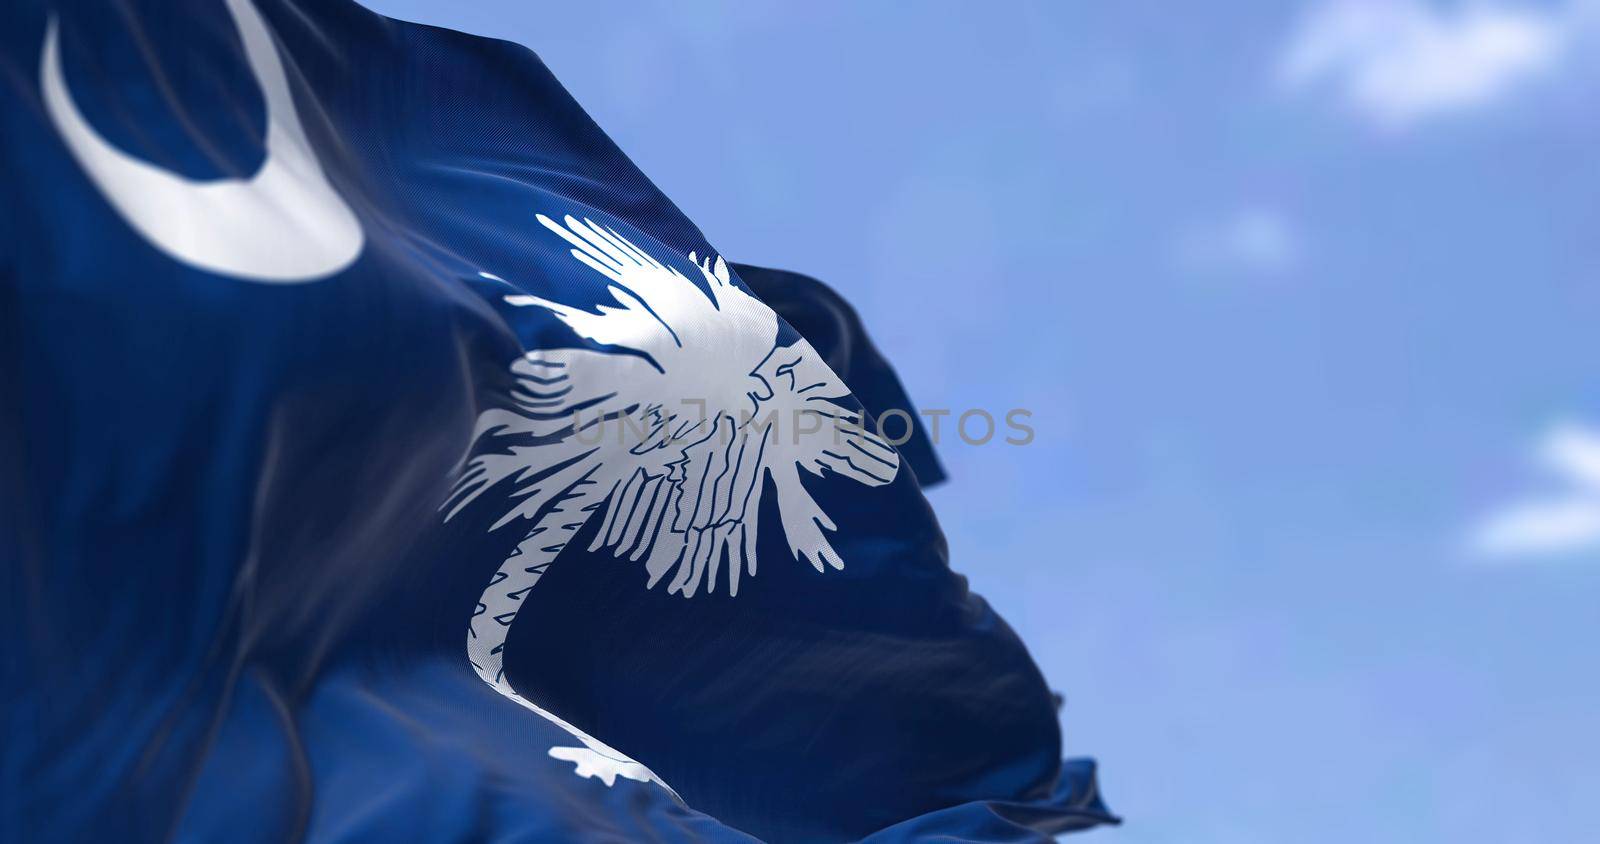 The US state flag of South Carolina waving in the wind by rarrarorro